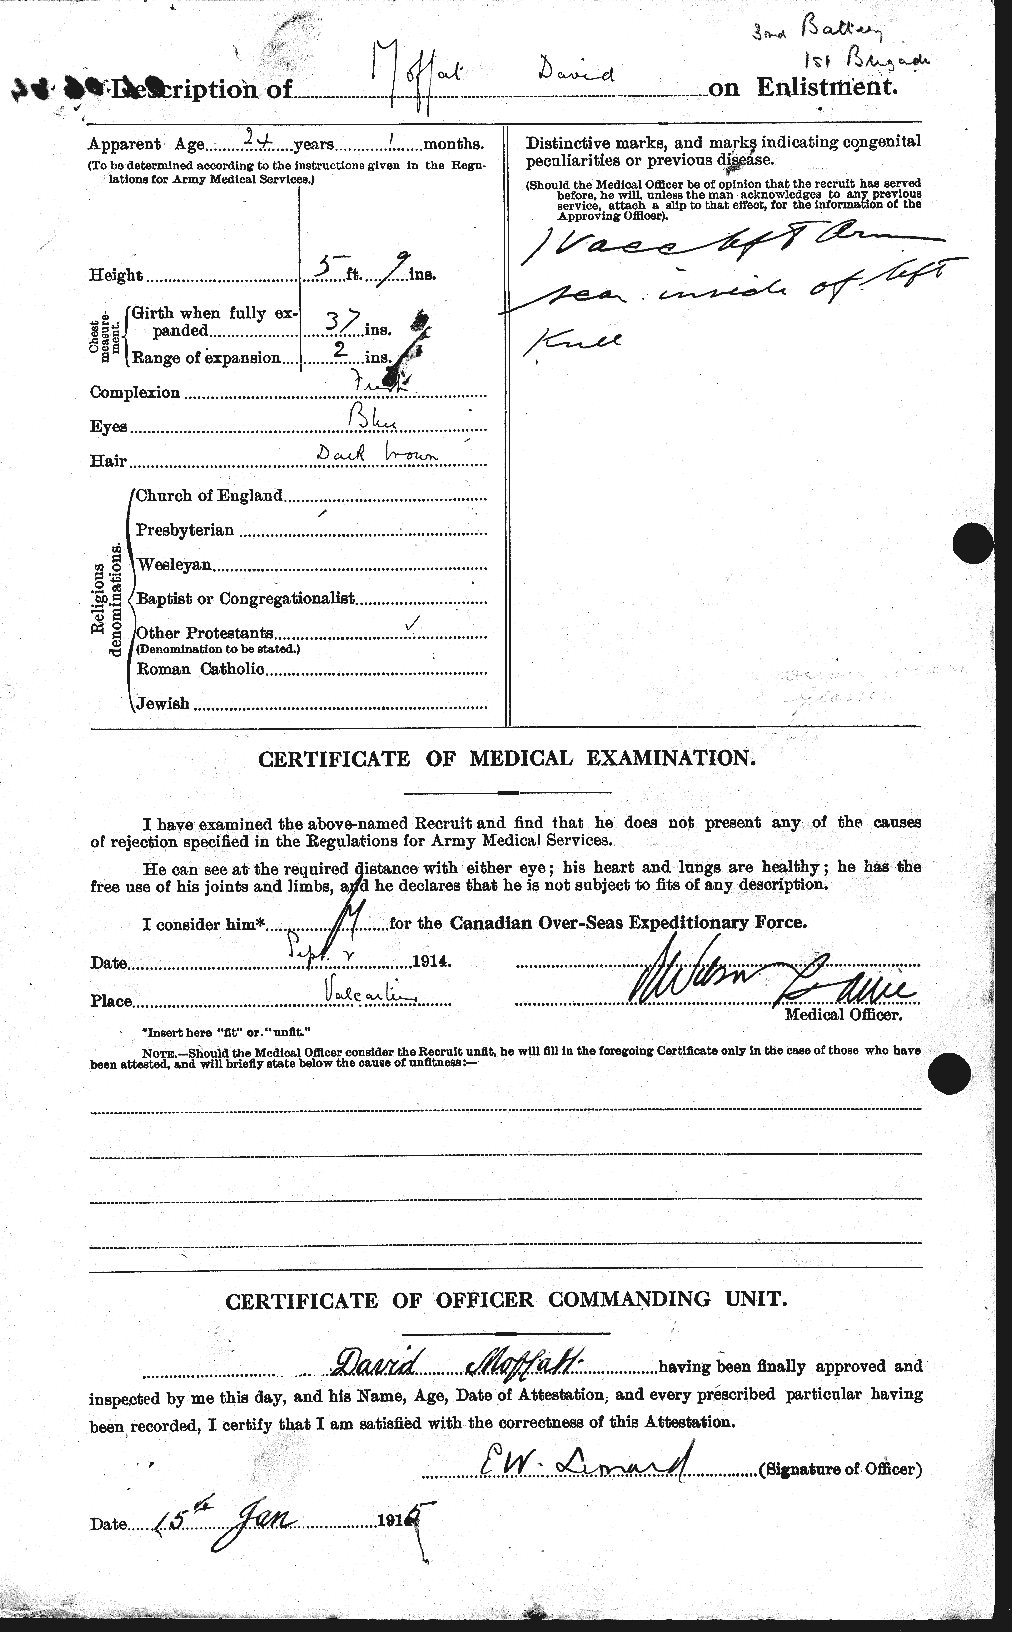 Personnel Records of the First World War - CEF 499117b